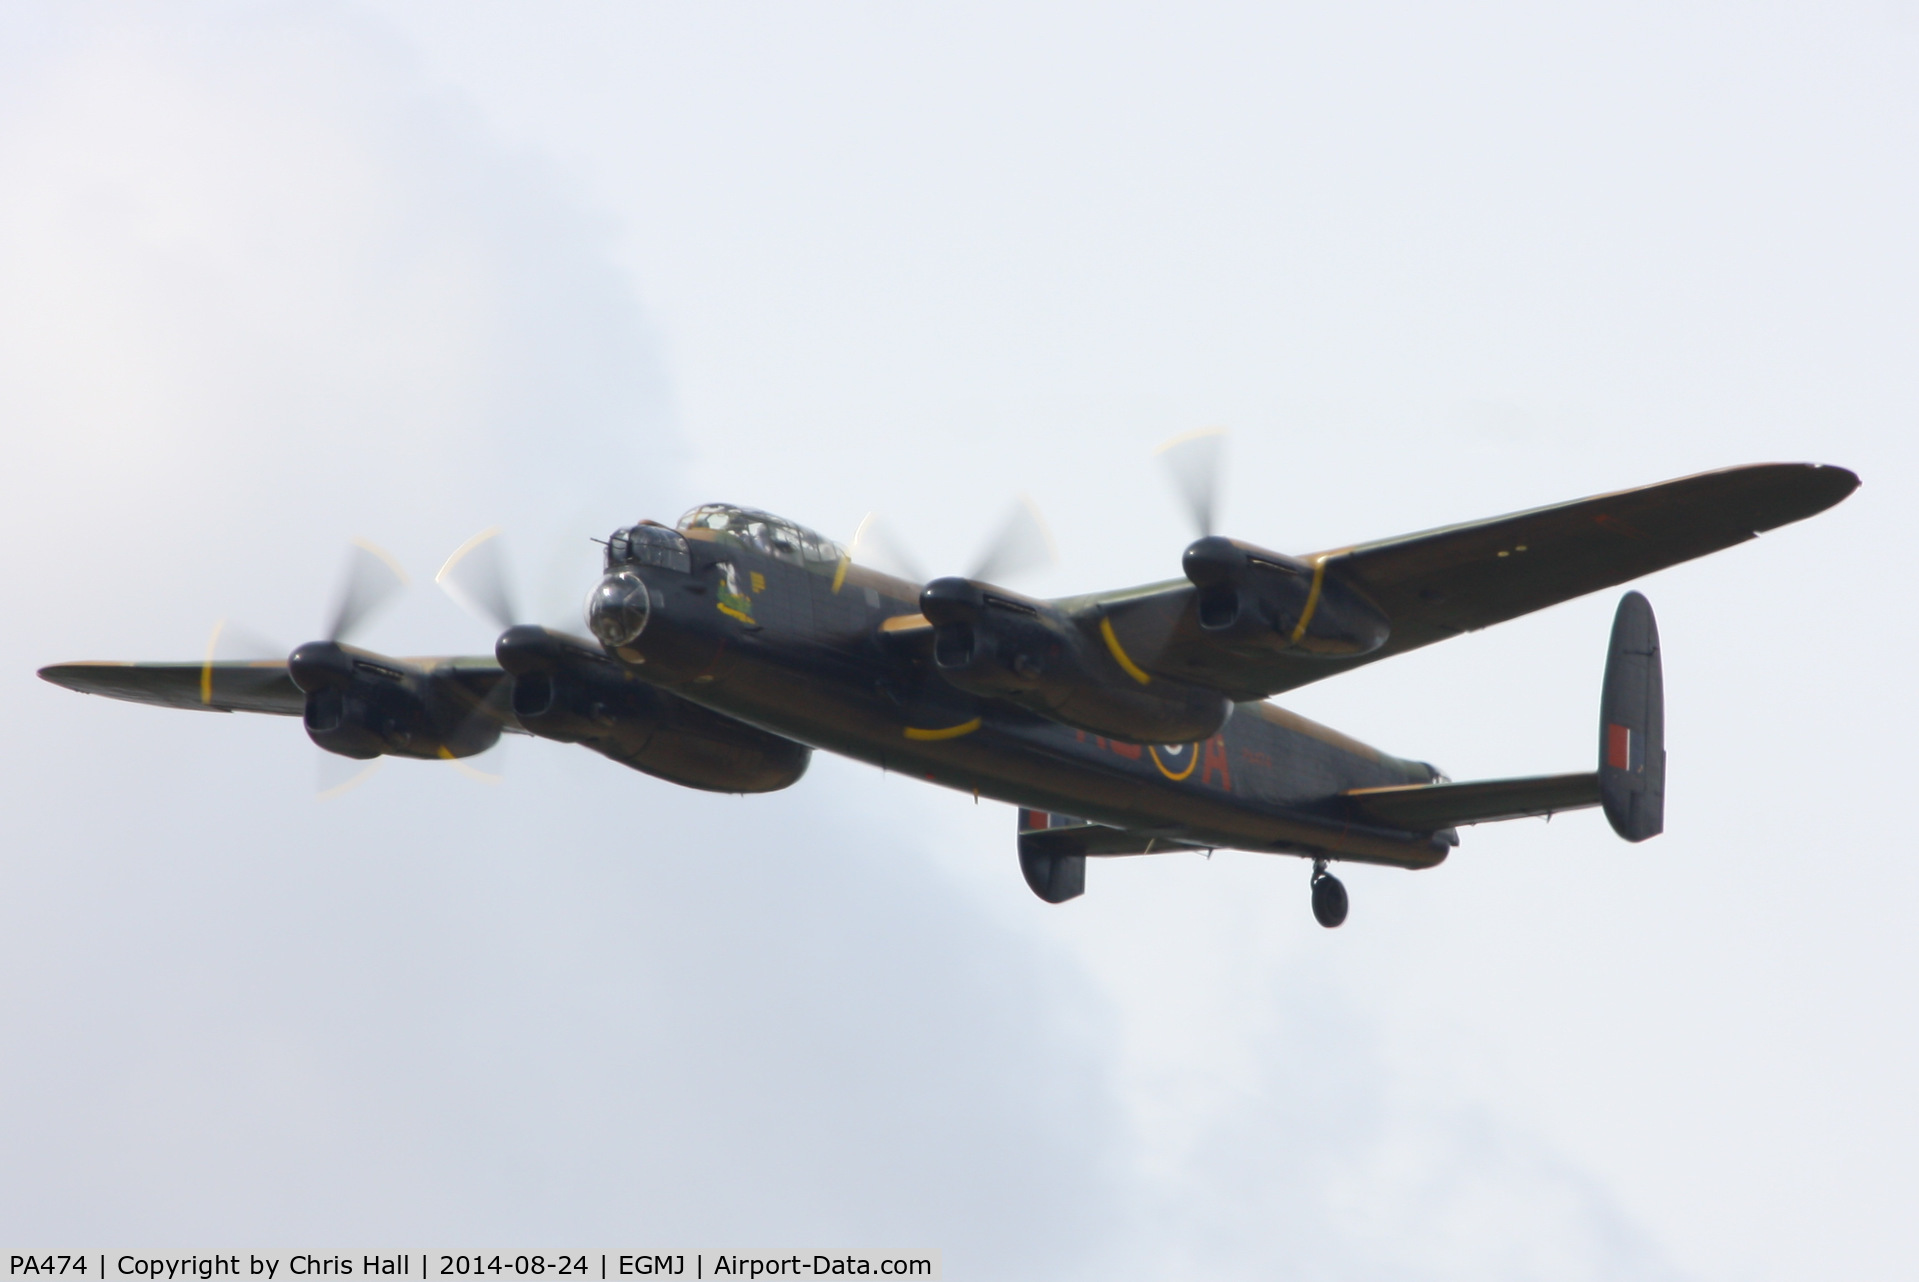 PA474, 1945 Avro 683 Lancaster B1 C/N VACH0052/D2973, at the Little Gransden Airshow 2014